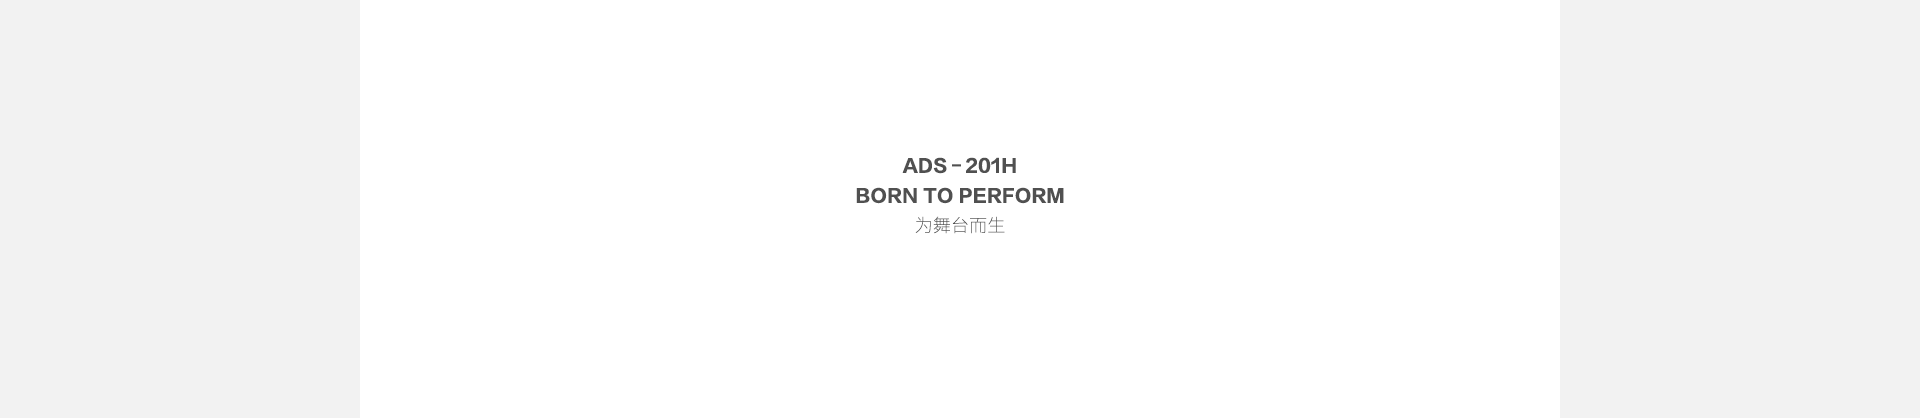 02-ADS-201H_10.png